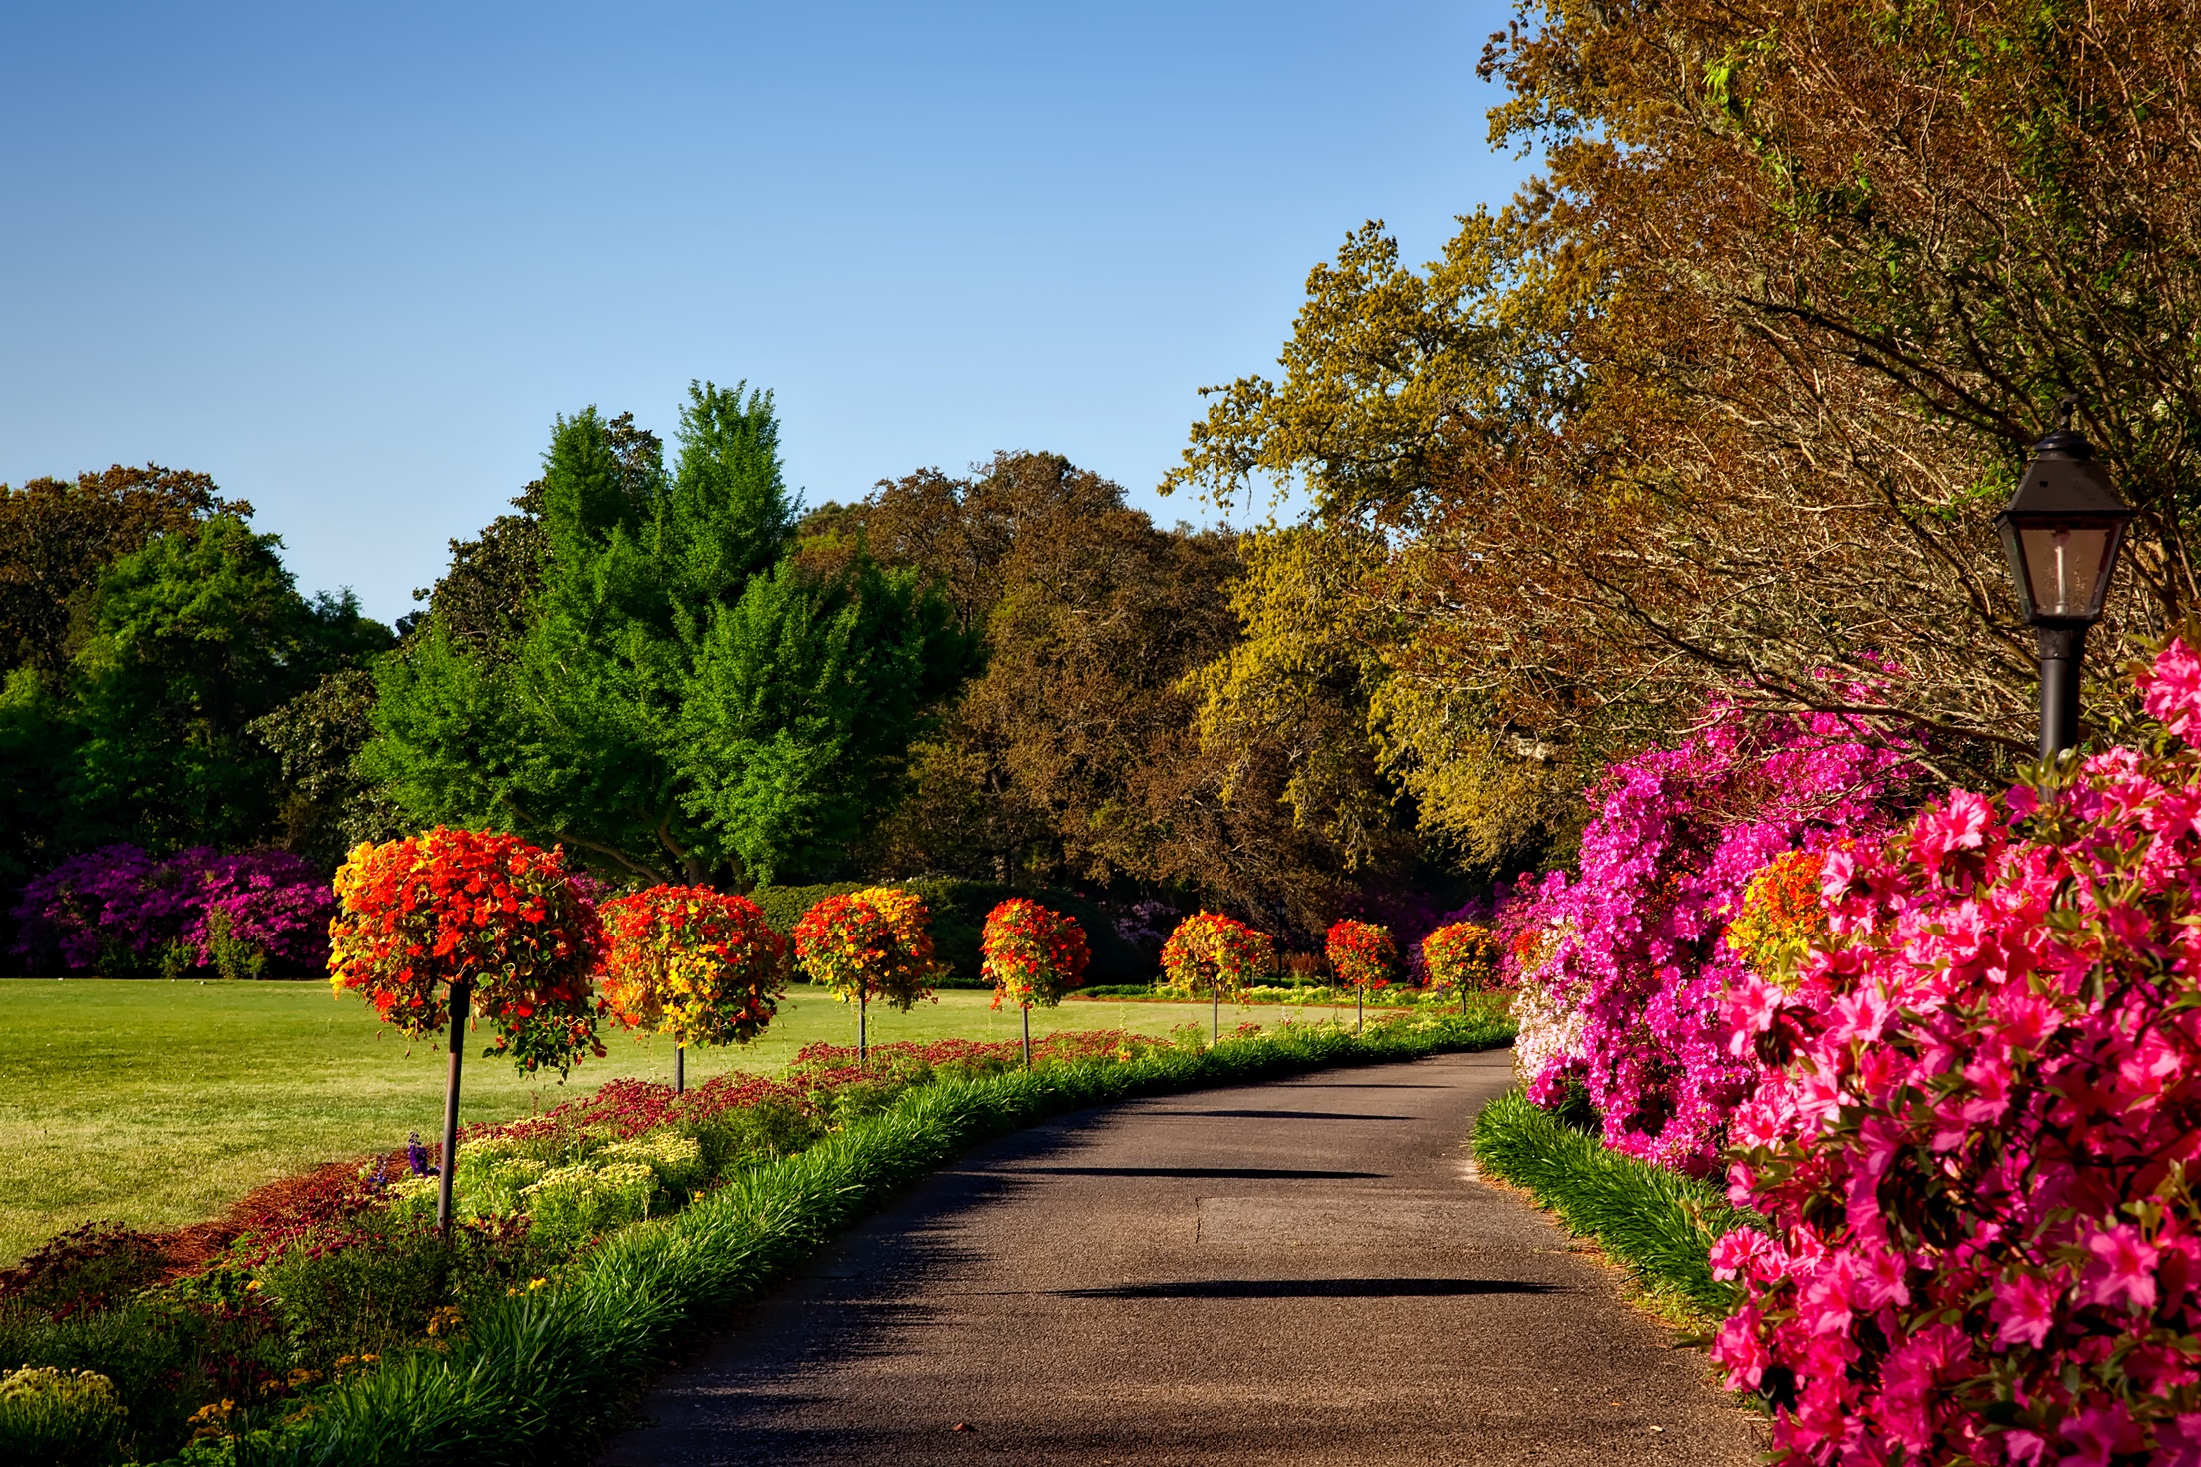 A walk through a summer park surrounded by flowers